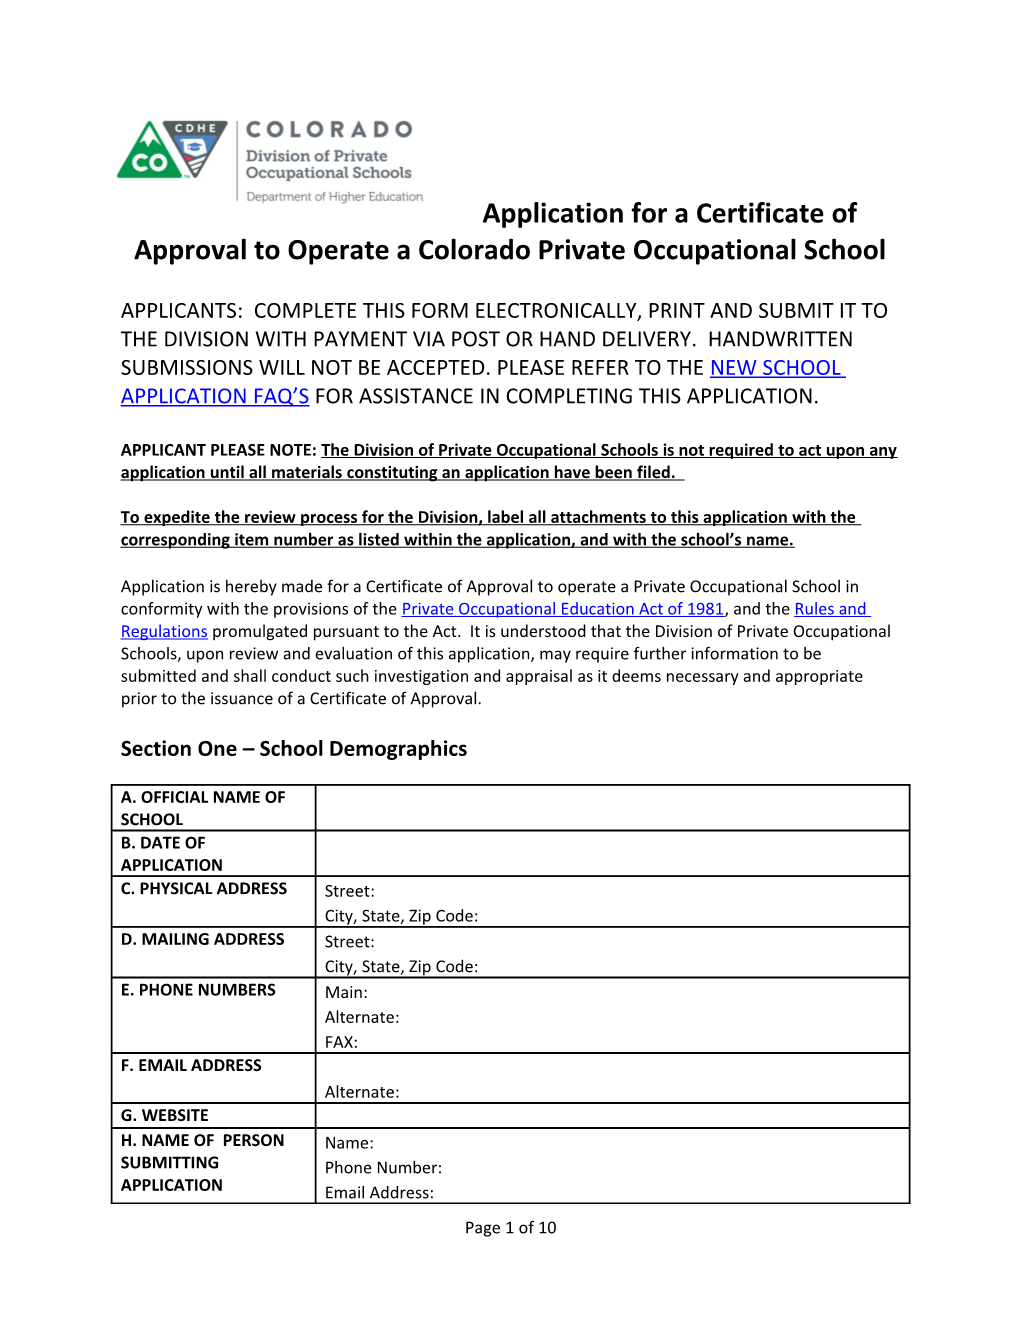 Application for a Certificate of Approval to Operate Acolorado Private Occupational School